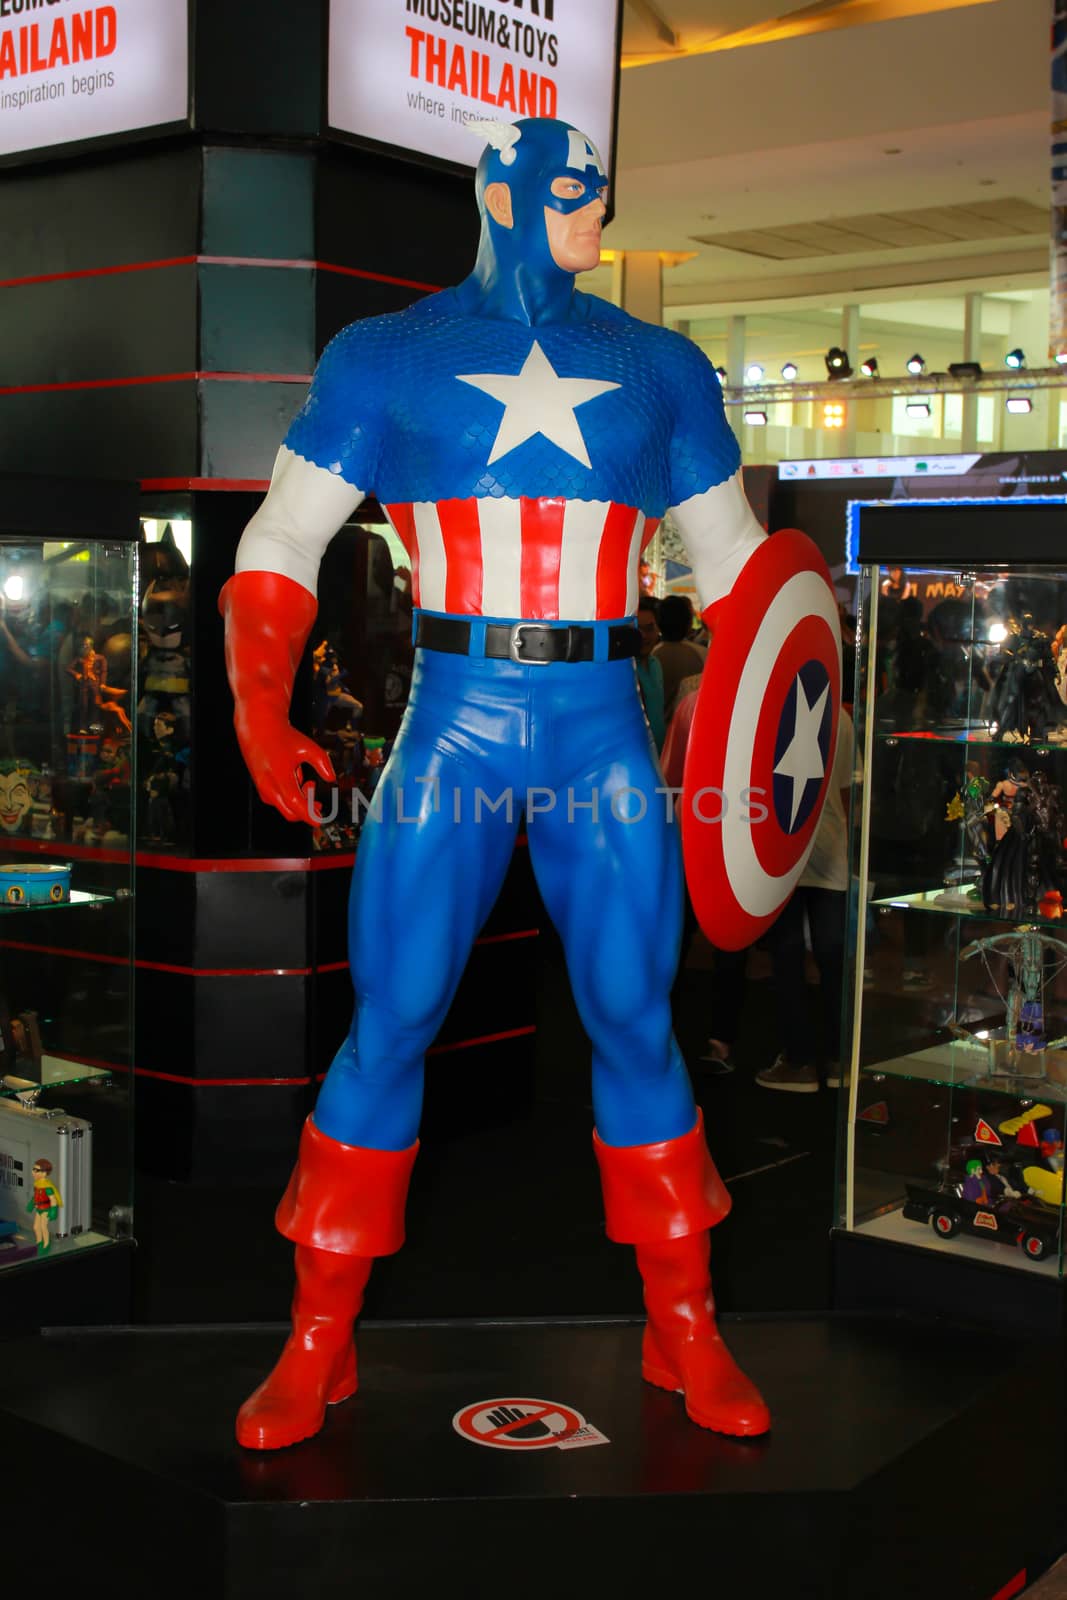 A model of the character Captain America from the movies and com by redthirteen